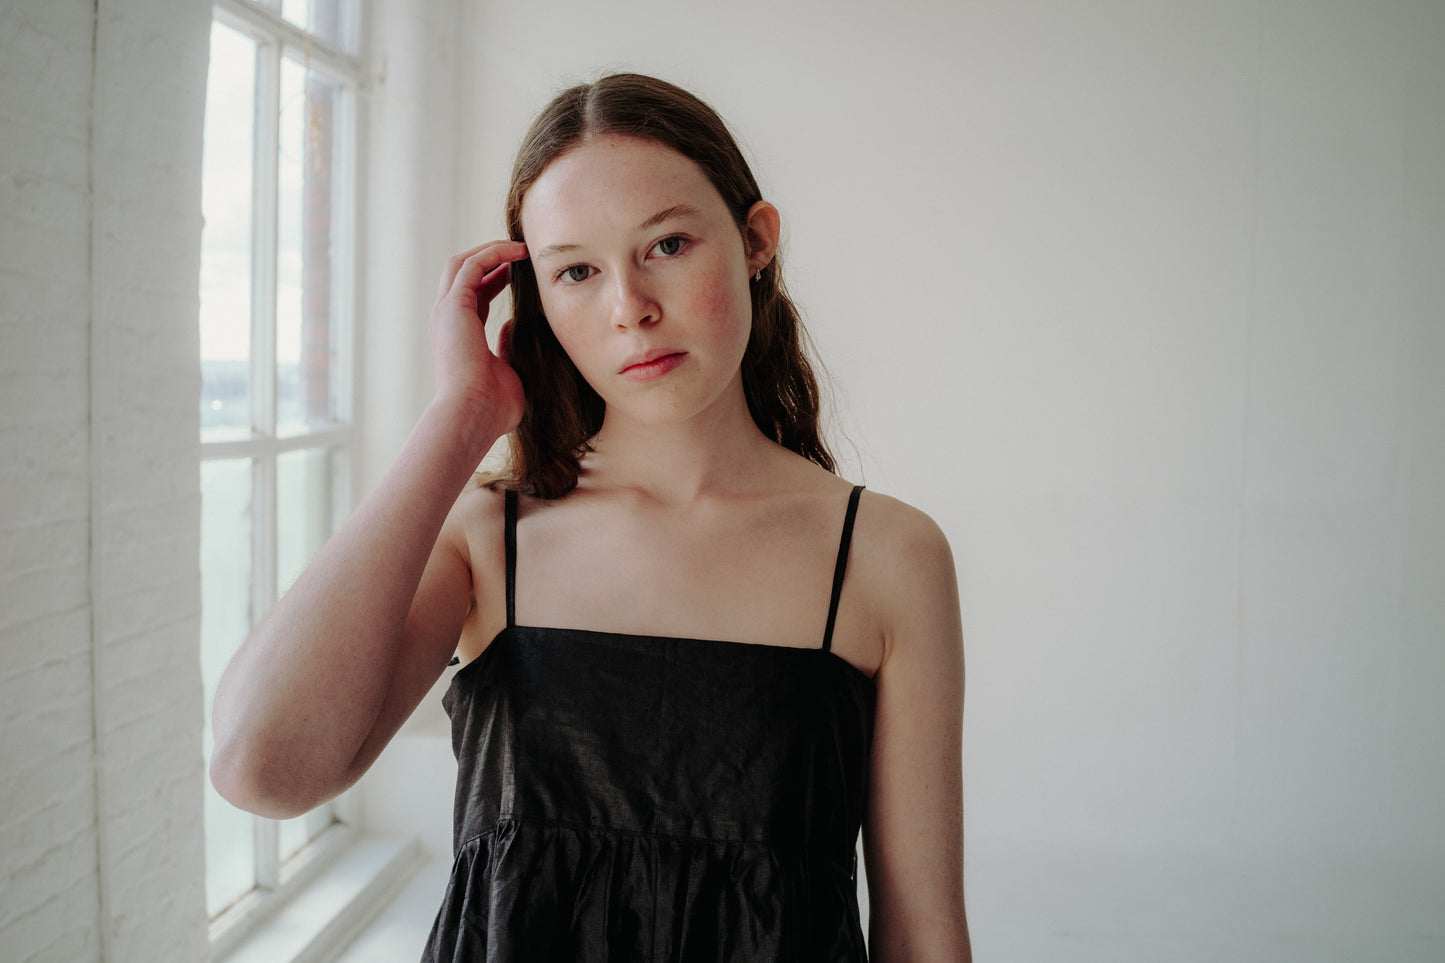 CELIA DRESS | BLACK BEETLED | Our Celia Dress is a simple, no fuss design that is easy to throw on and layer up. The voluminous gathered skirt is constrasted with a narrow bodice, featuring side seam pockets and the most delicate straps that tie in three